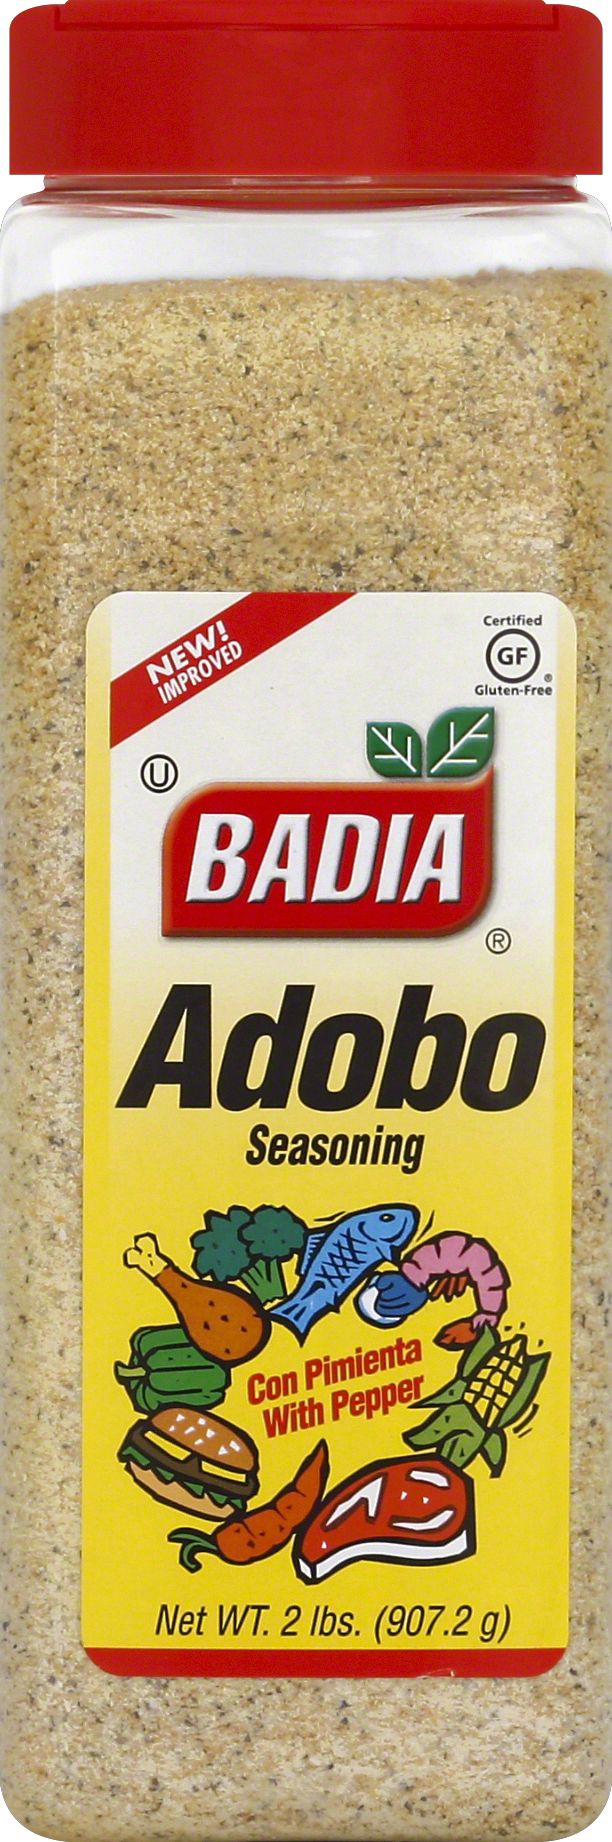 Badia Complete Seasoning, 1.75-pounds (Pack of 3)